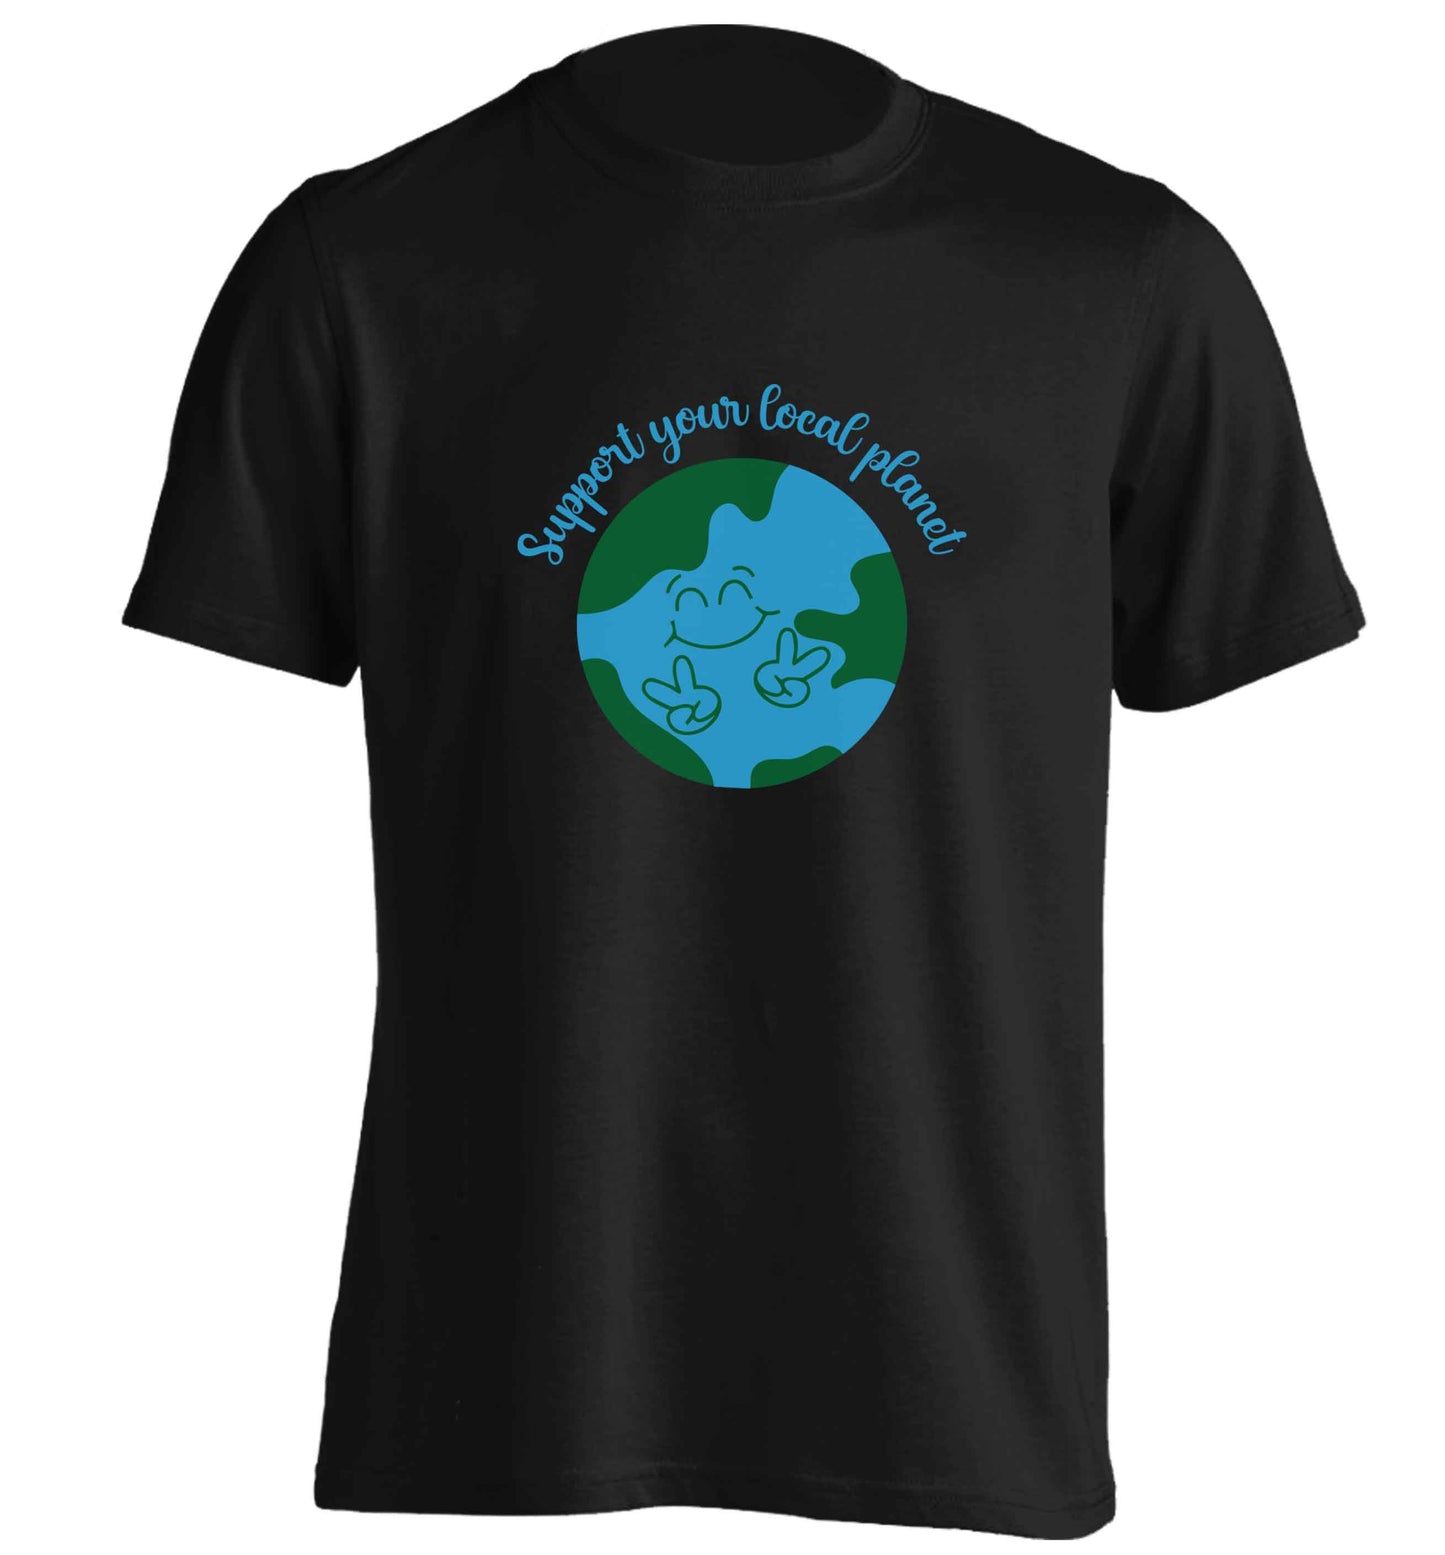 Support your local planet adults unisex black Tshirt 2XL